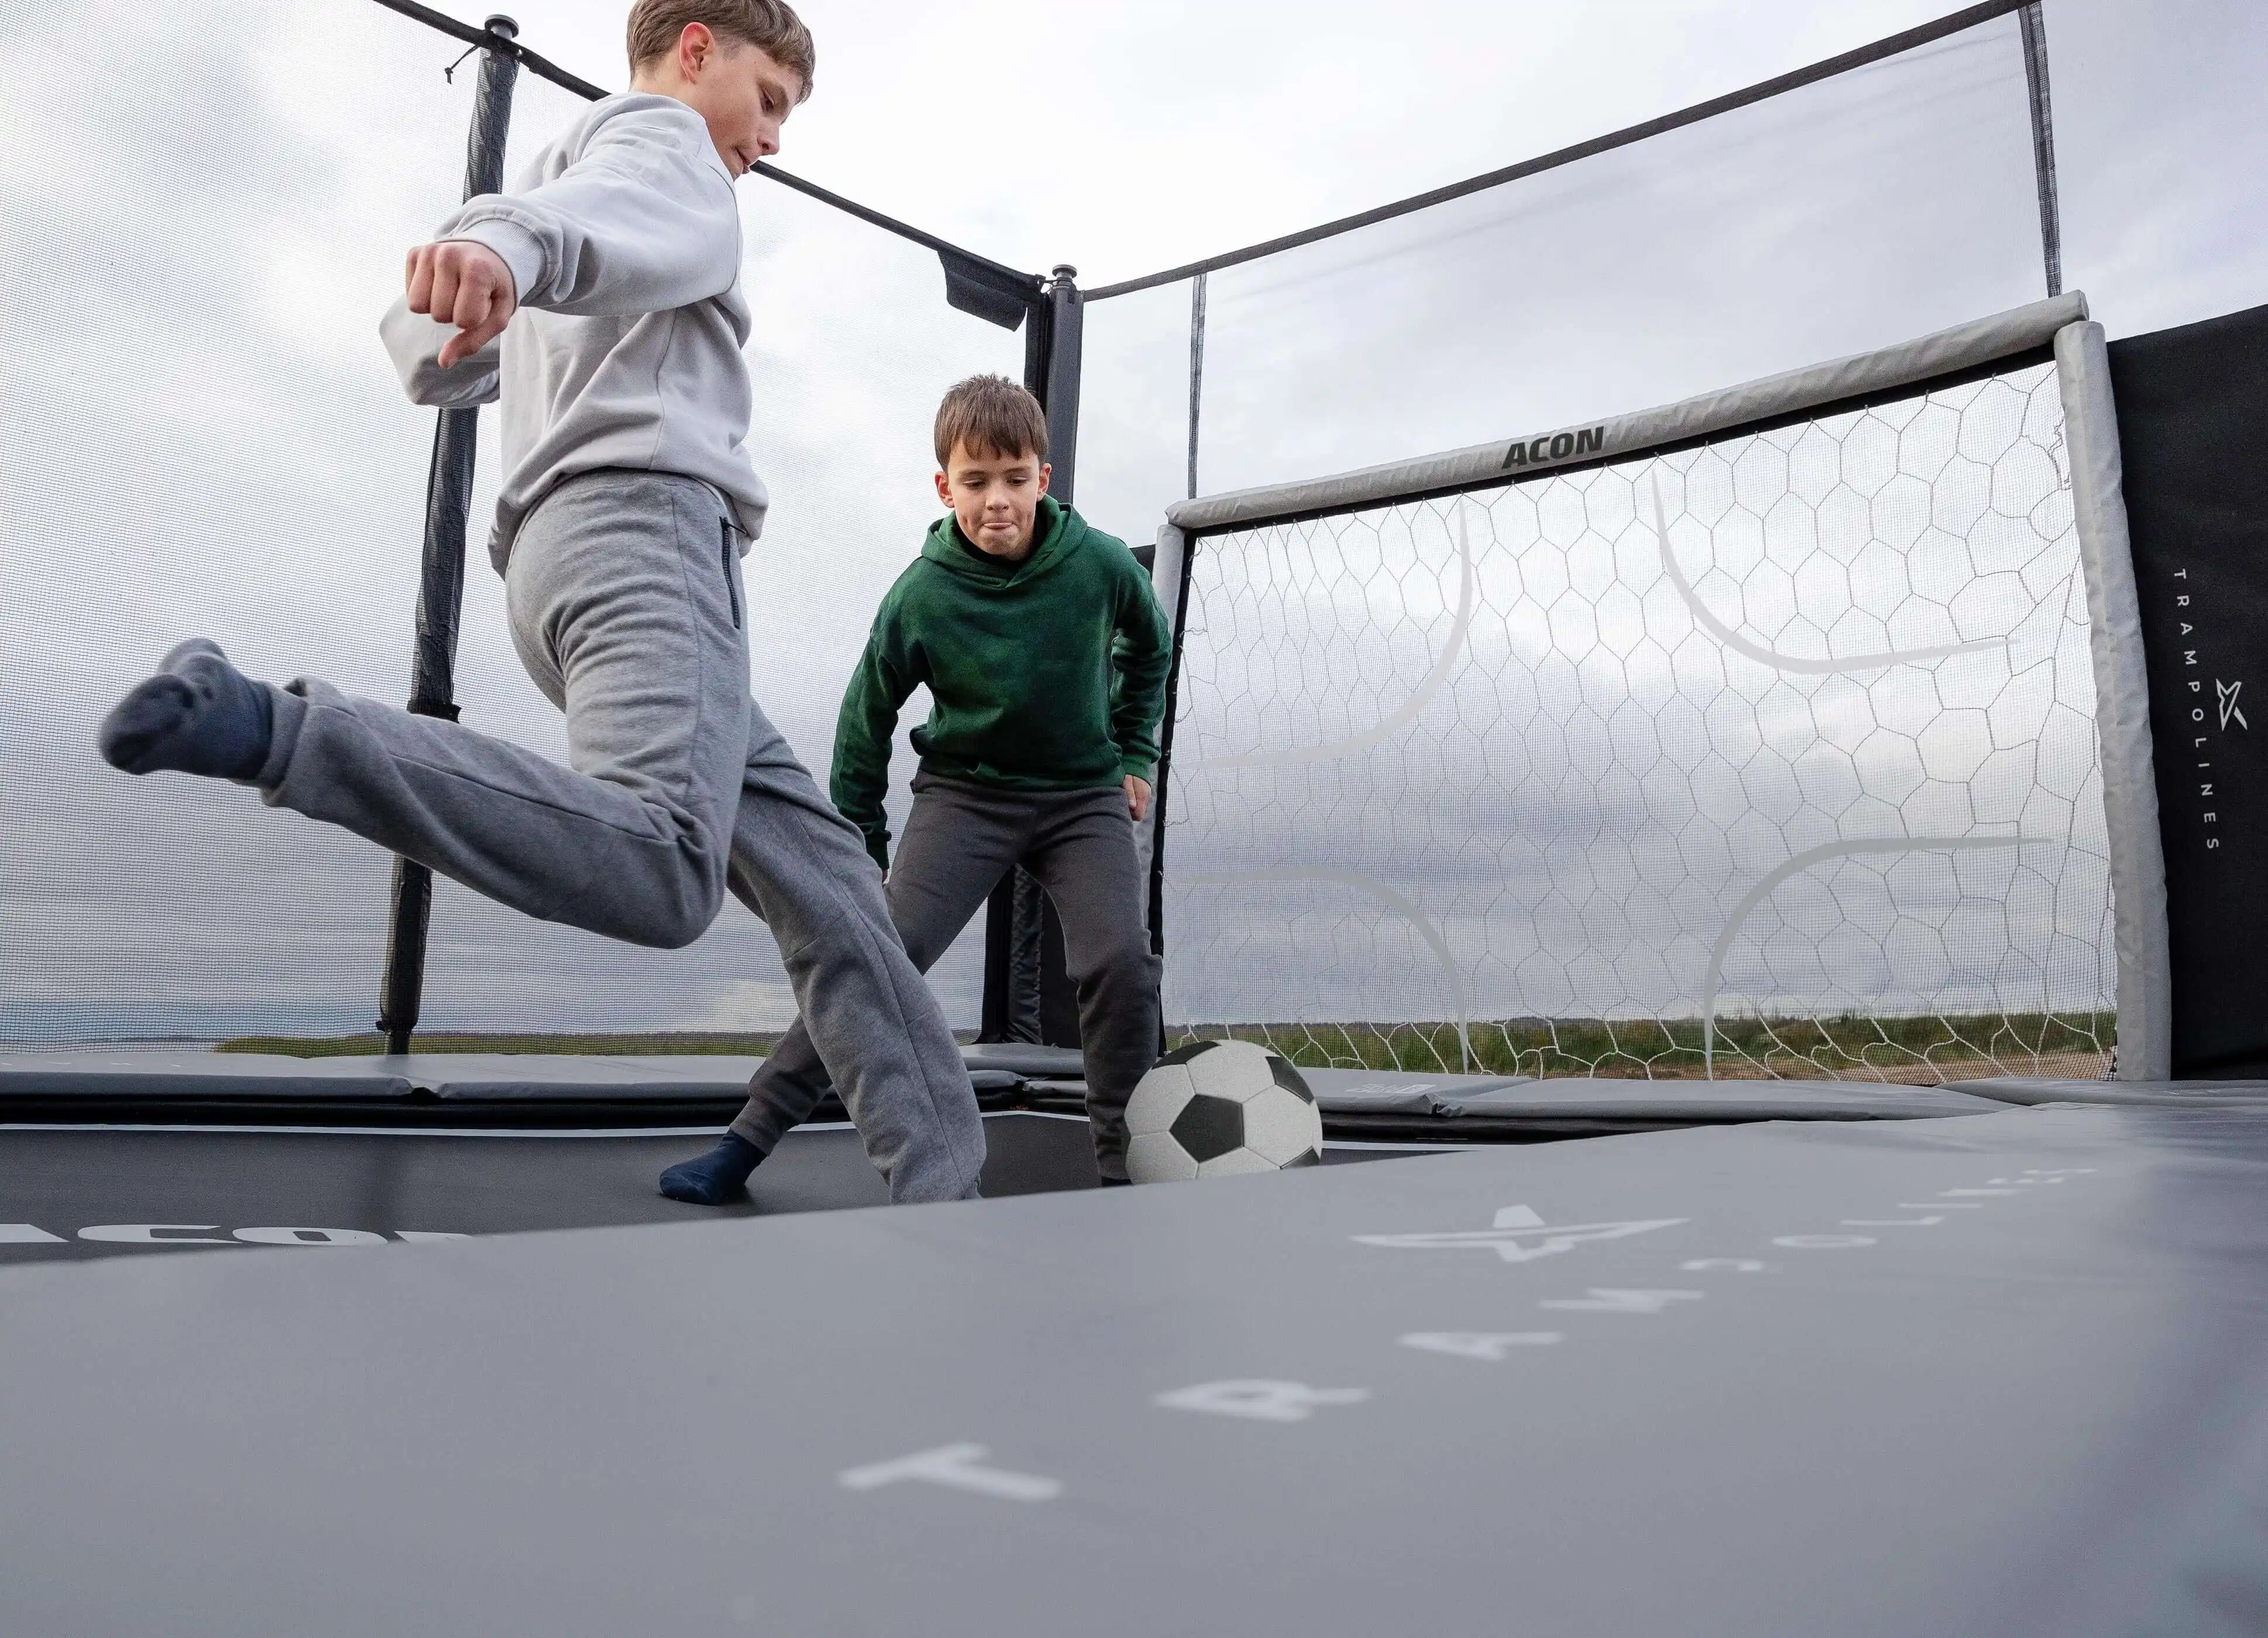 Two boys play trampoline soccer on the Acon X Trampoline.